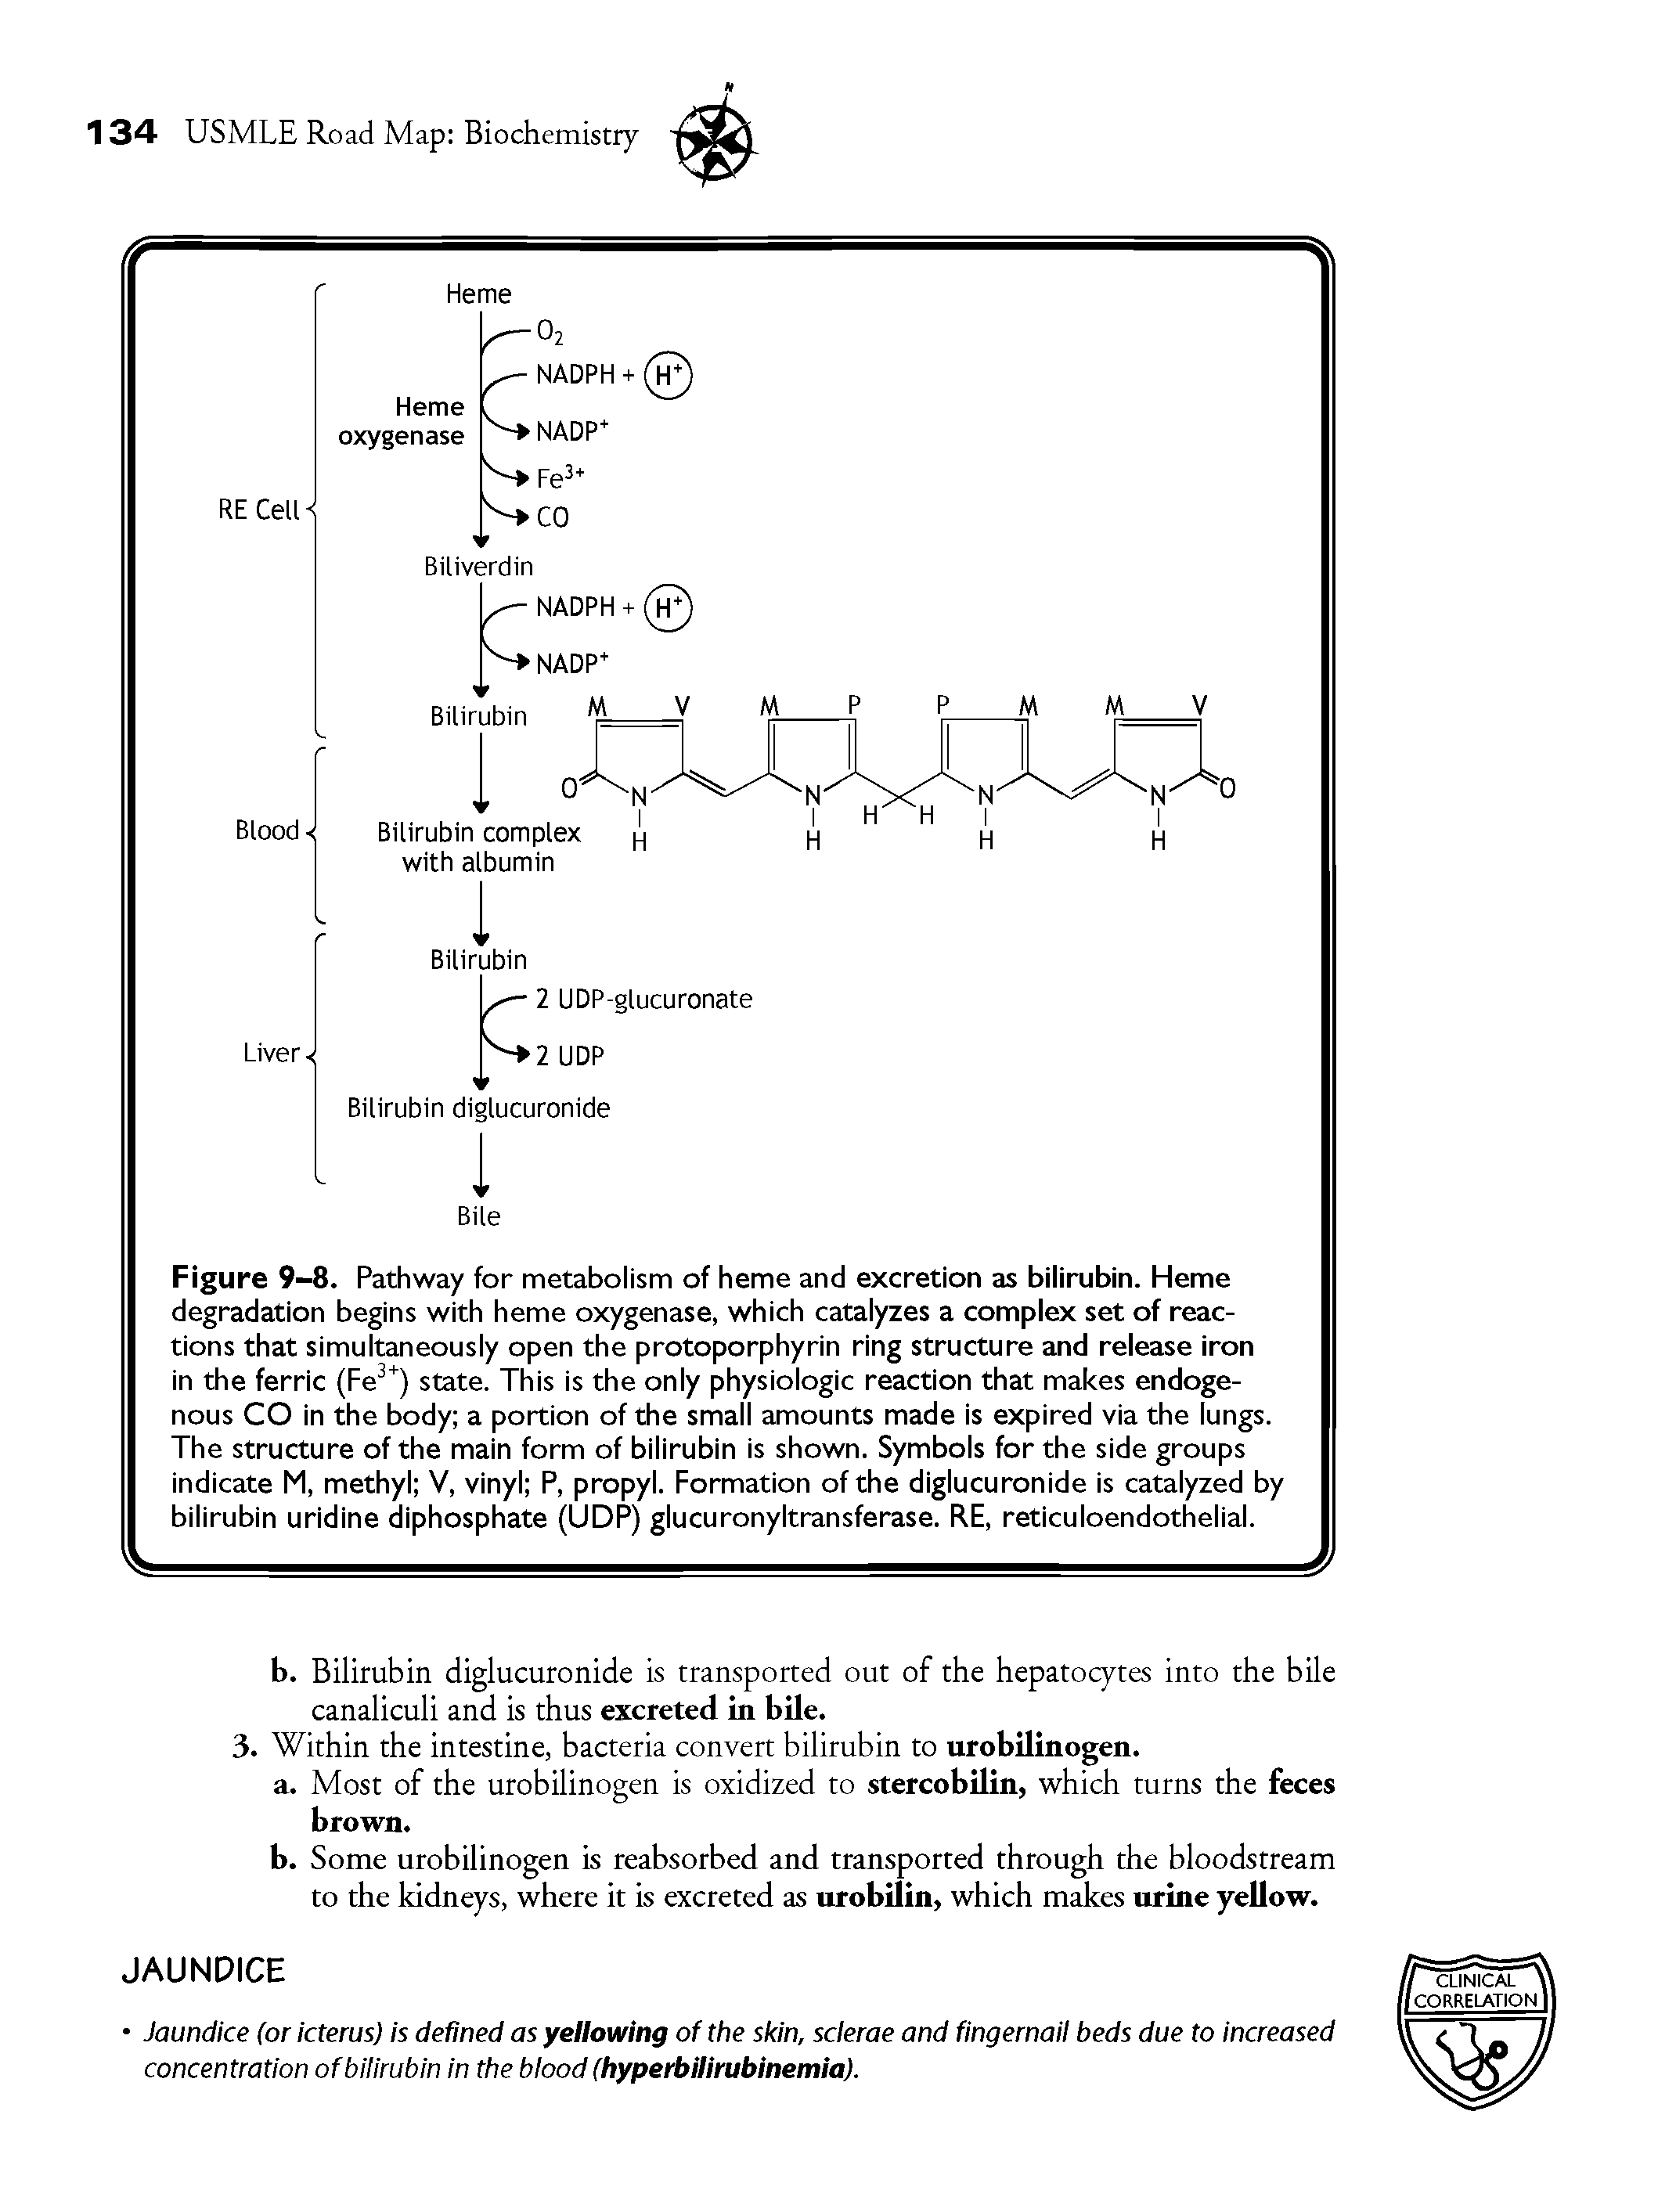 Figure 9-8. Pathway for metabolism of heme and excretion as bilirubin. Heme degradation begins with heme oxygenase, which catalyzes a complex set of reactions that simultaneously open the protoporphyrin ring structure and release iron in the ferric (Fe ) state. This is the only physiologic reaction that makes endogenous CO in the body a portion of the small amounts made is expired via the lungs. The structure of the main form of bilirubin is shown. Symbols for the side groups indicate M, methyl V, vinyl P, propyl. Formation of the diglucuronide is catalyzed by bilirubin uridine diphosphate (UDP) glucuronyltransferase. RE, reticuloendothelial.